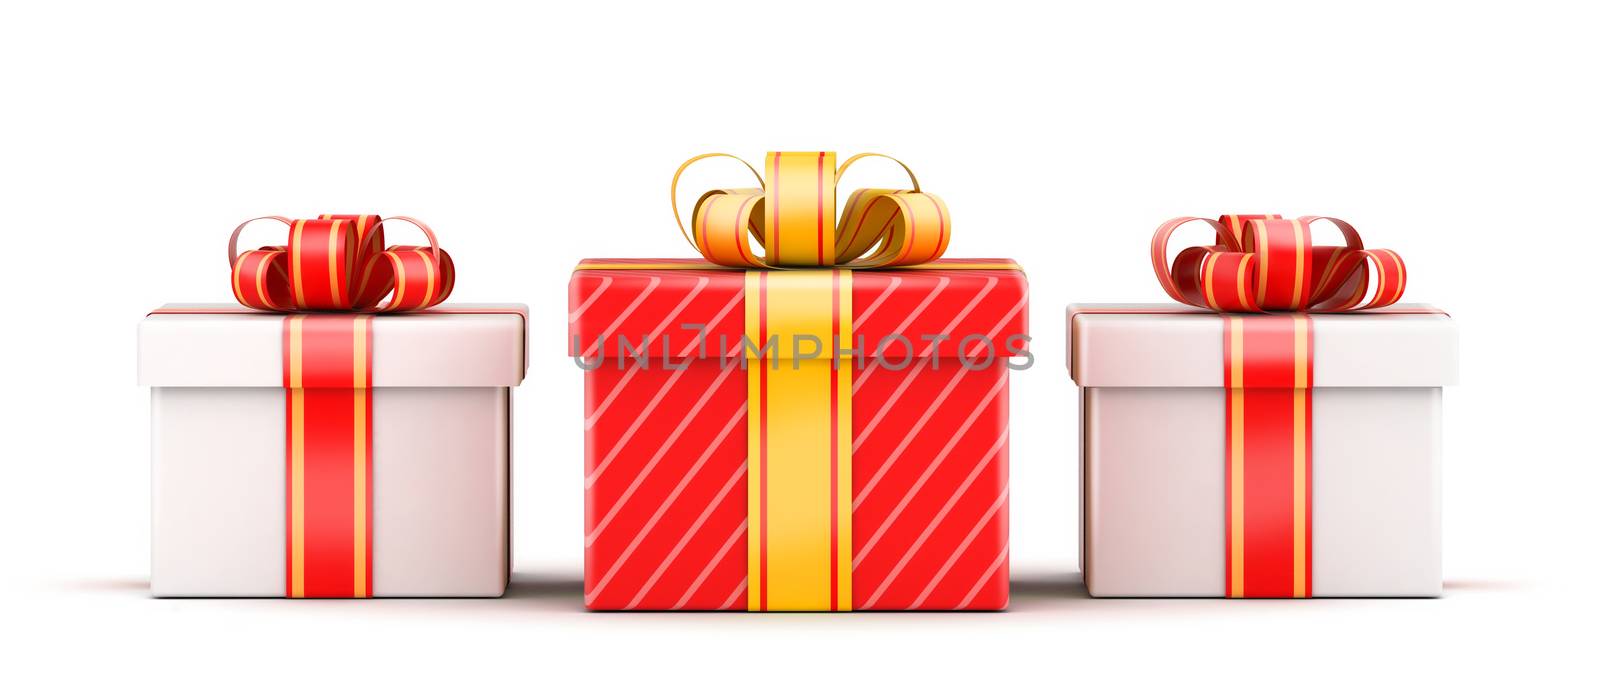 Three gift selection concept by iunewind